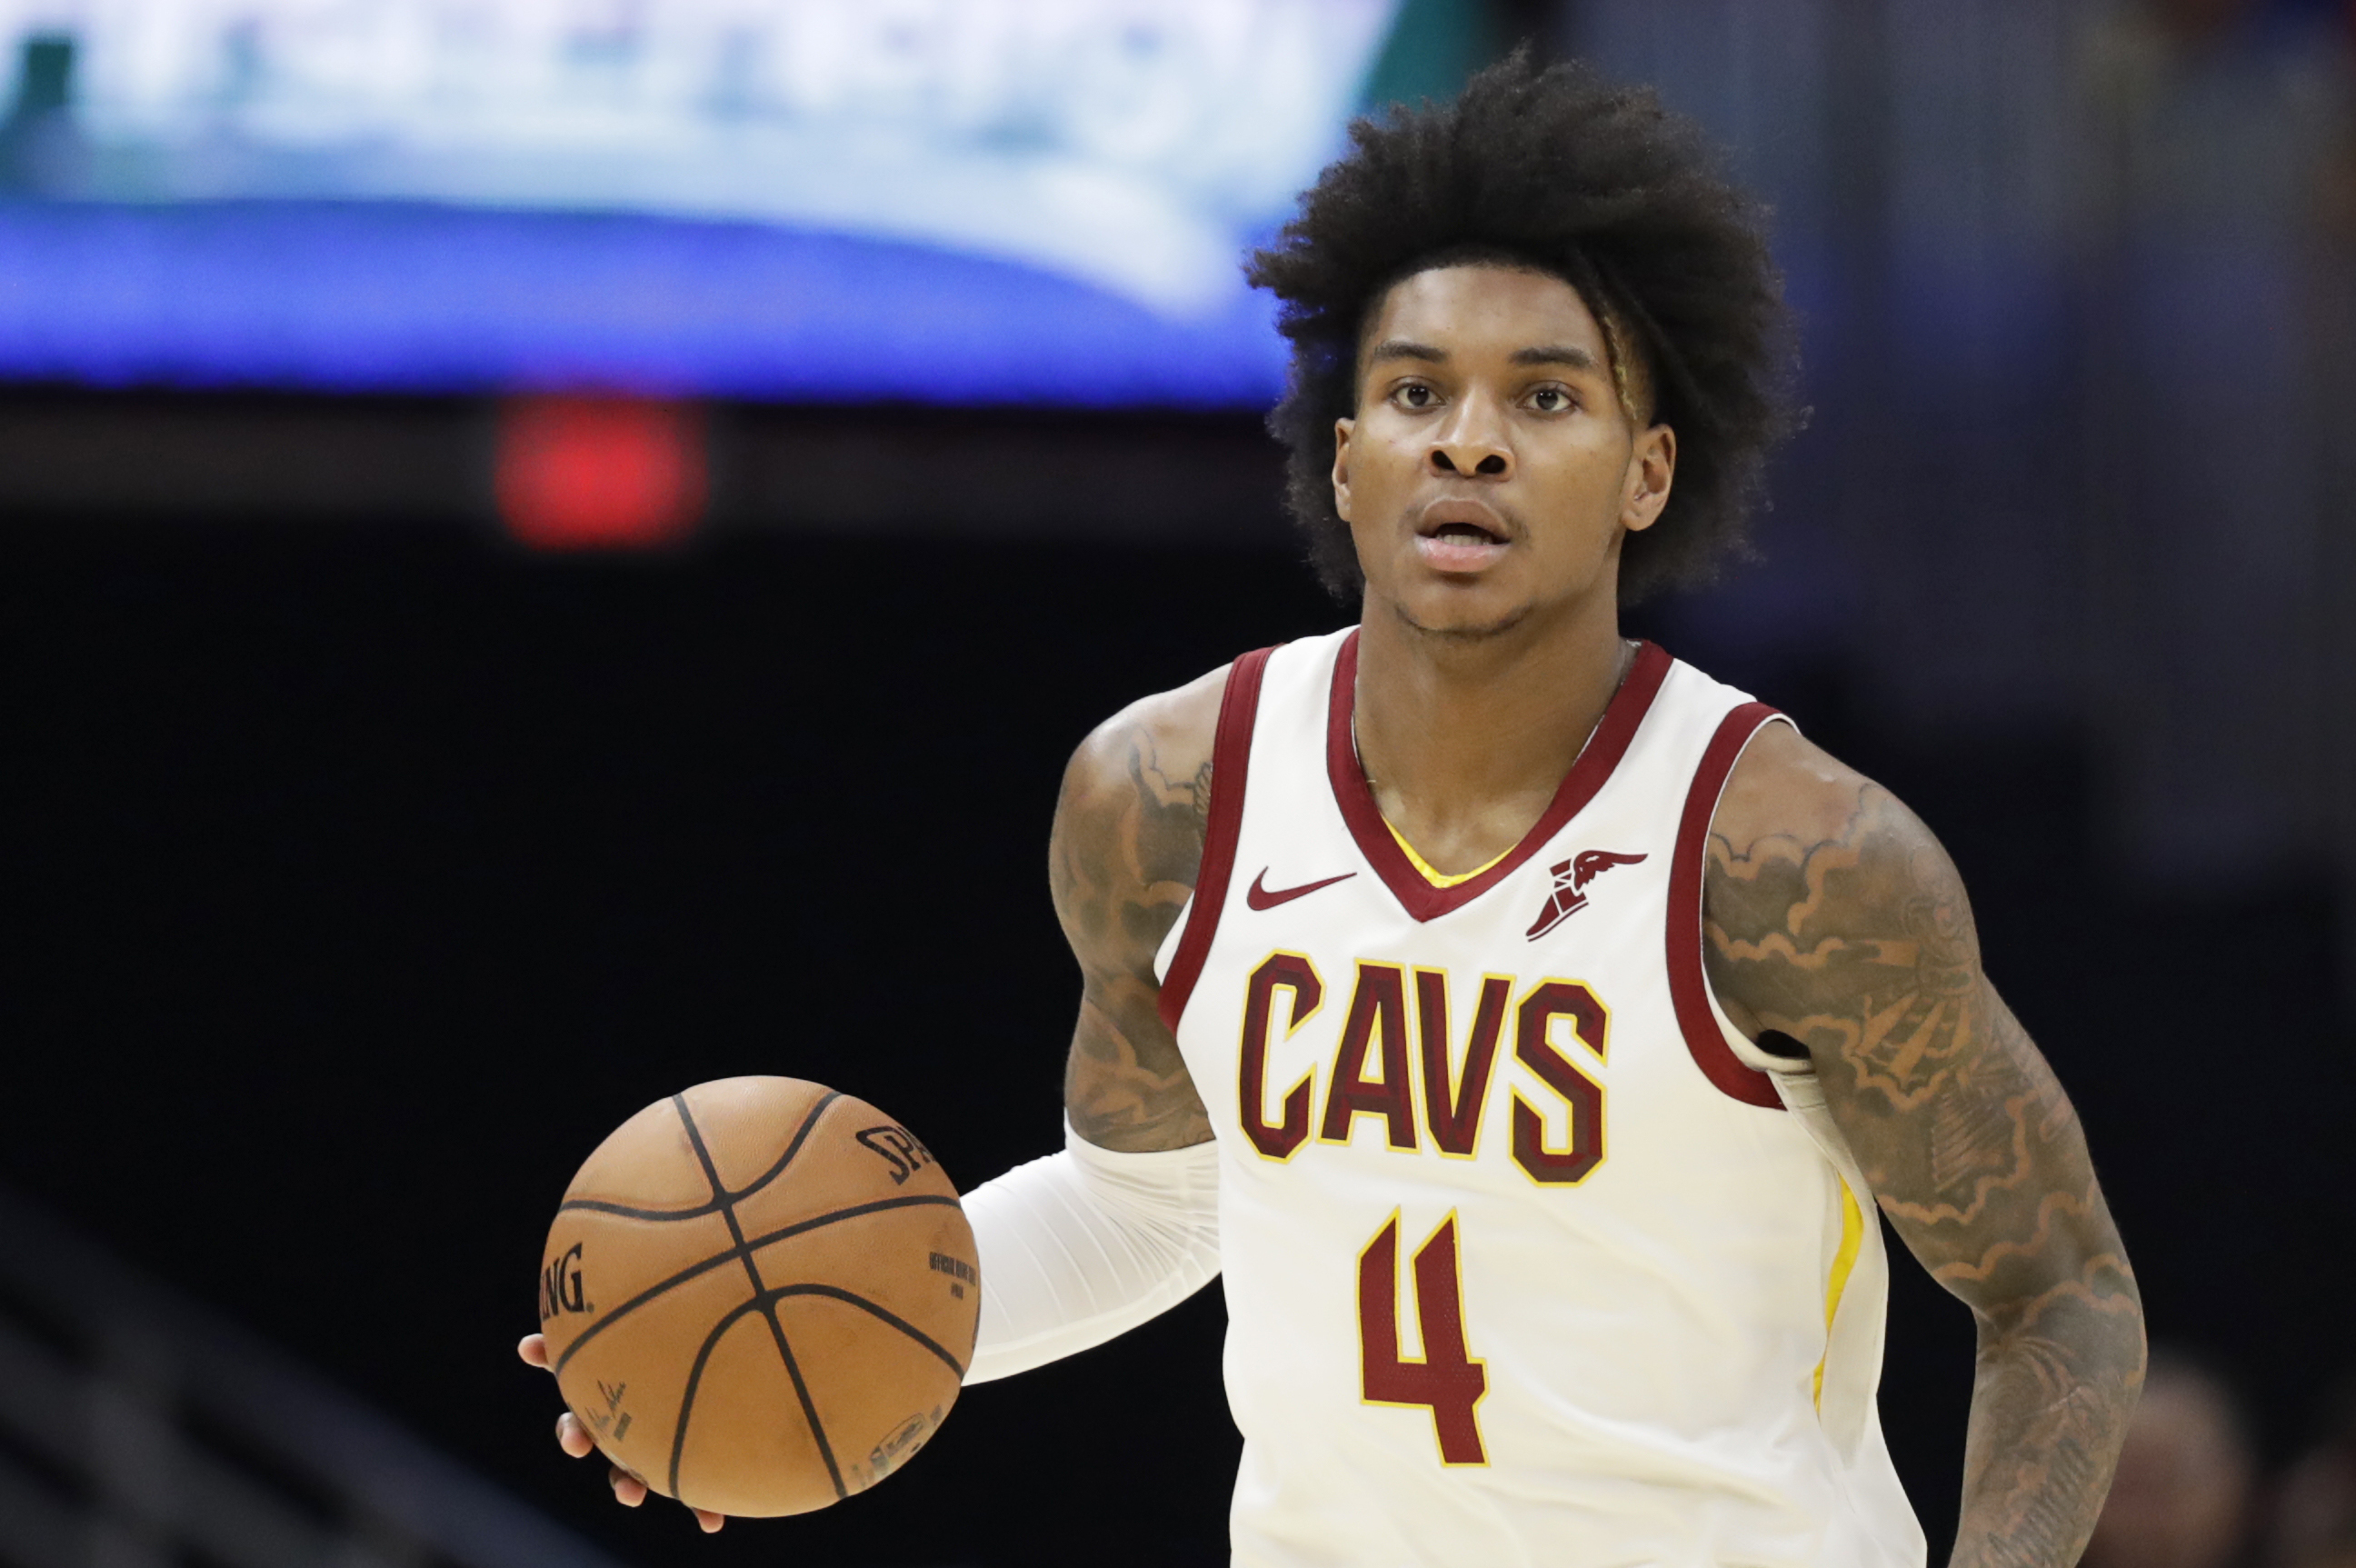 Cavaliers Rookie Kevin Porter Jr Suspended 1 Game For Making Contact With Ref Bleacher Report Latest News Videos And Highlights